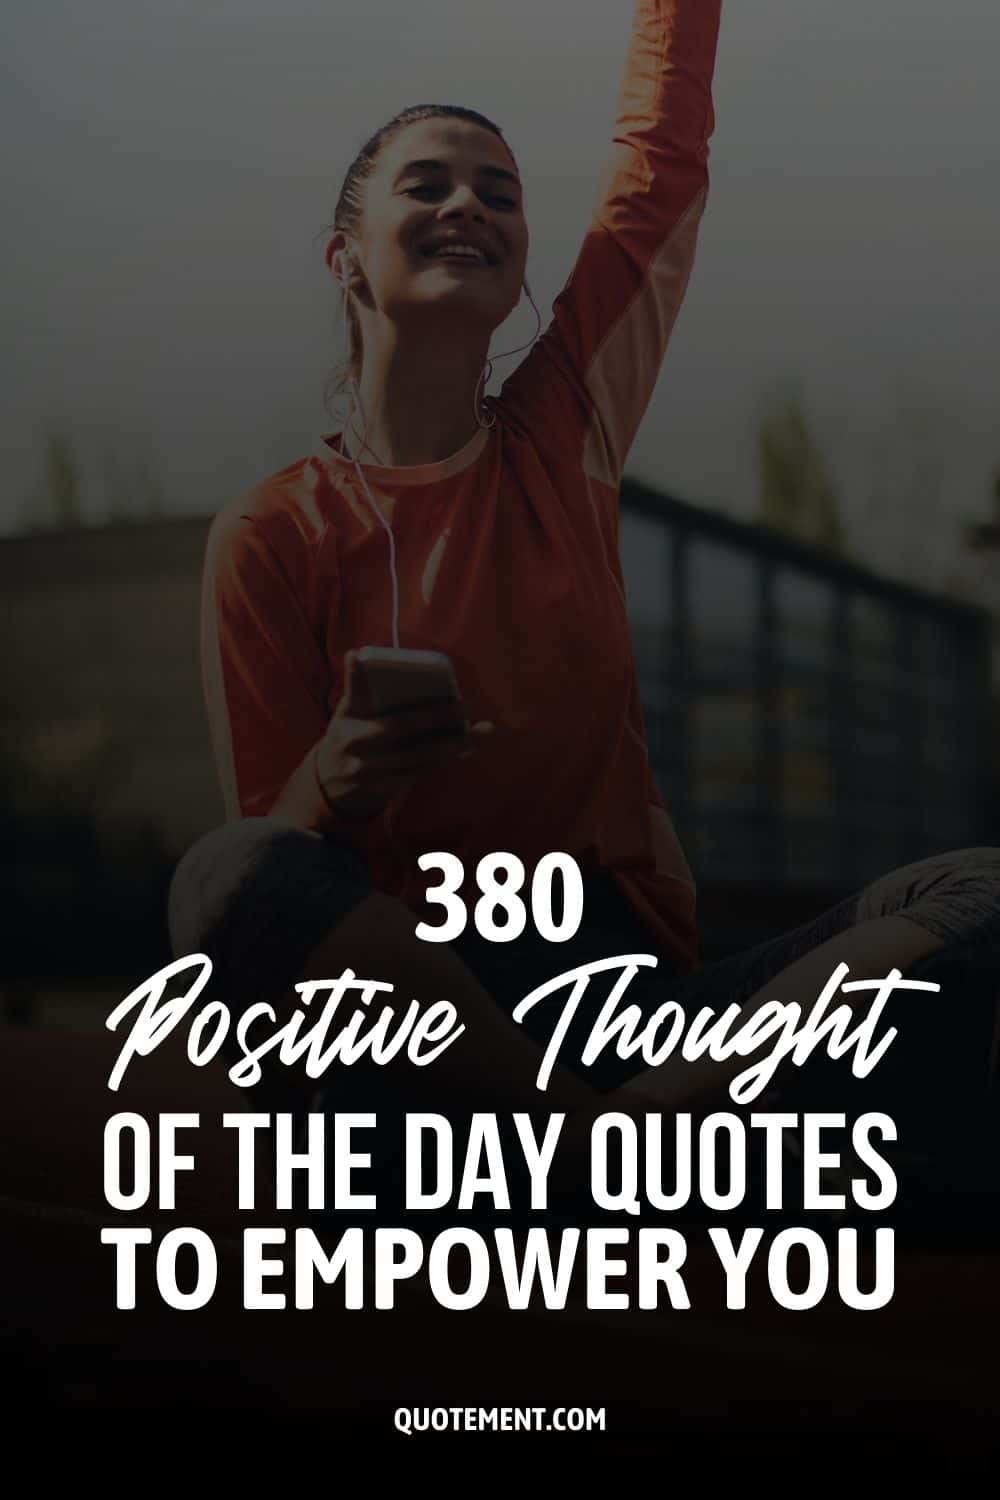 380 Positive Thought Of The Day Quotes To Empower You
